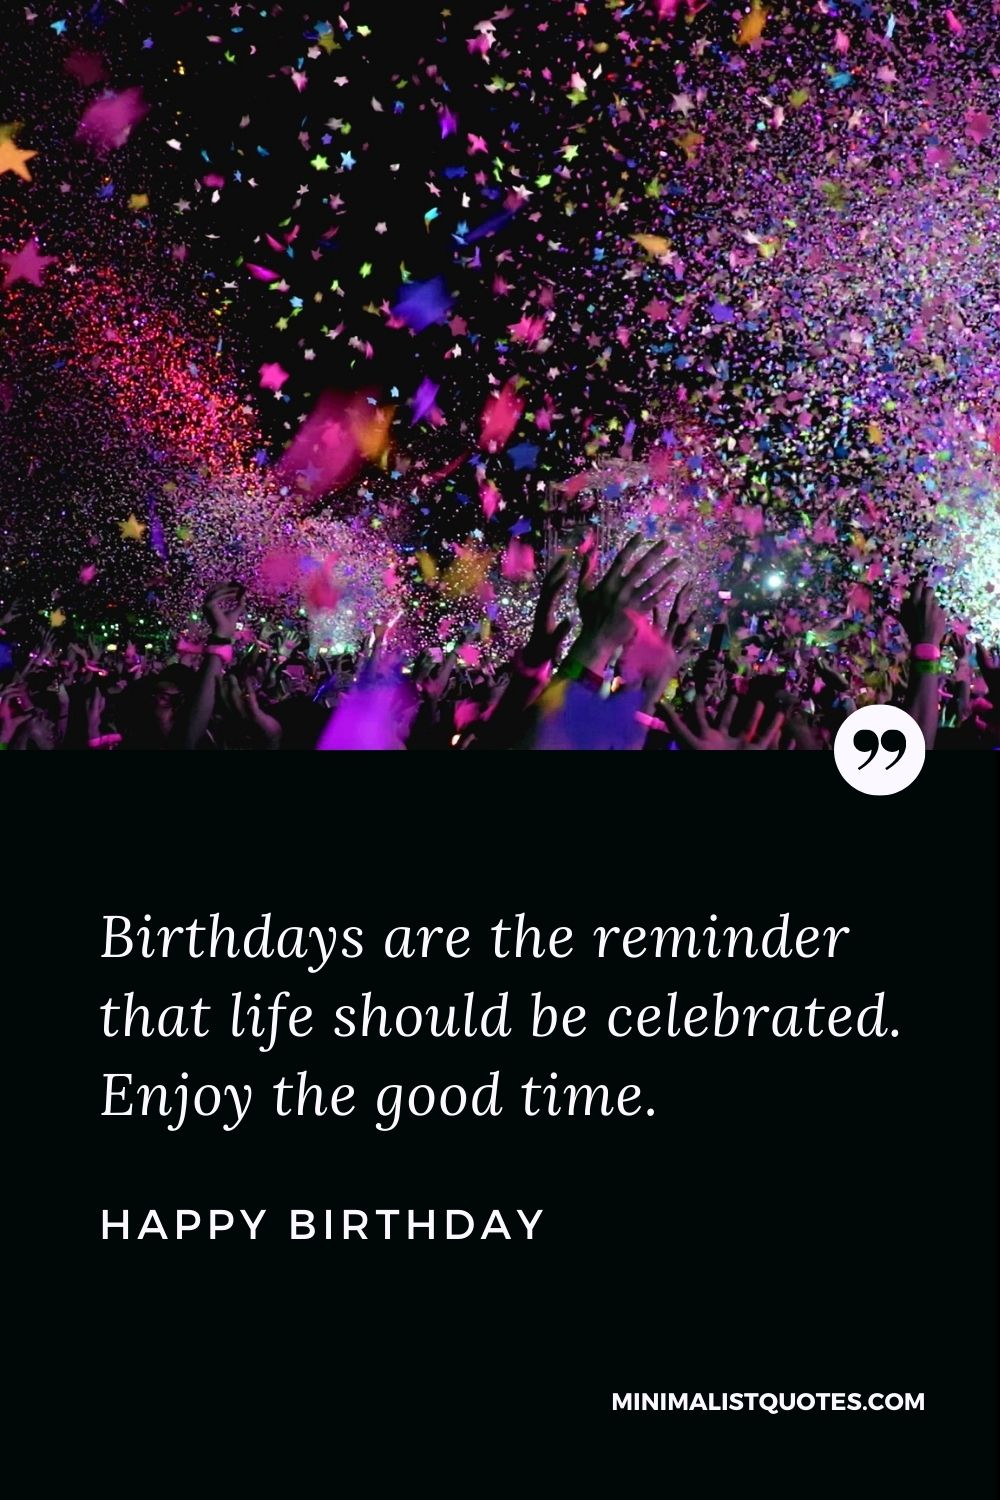 Happy Birthday Wishes - Birthdays are the reminder that life should be celebrated. Enjoy the good time.